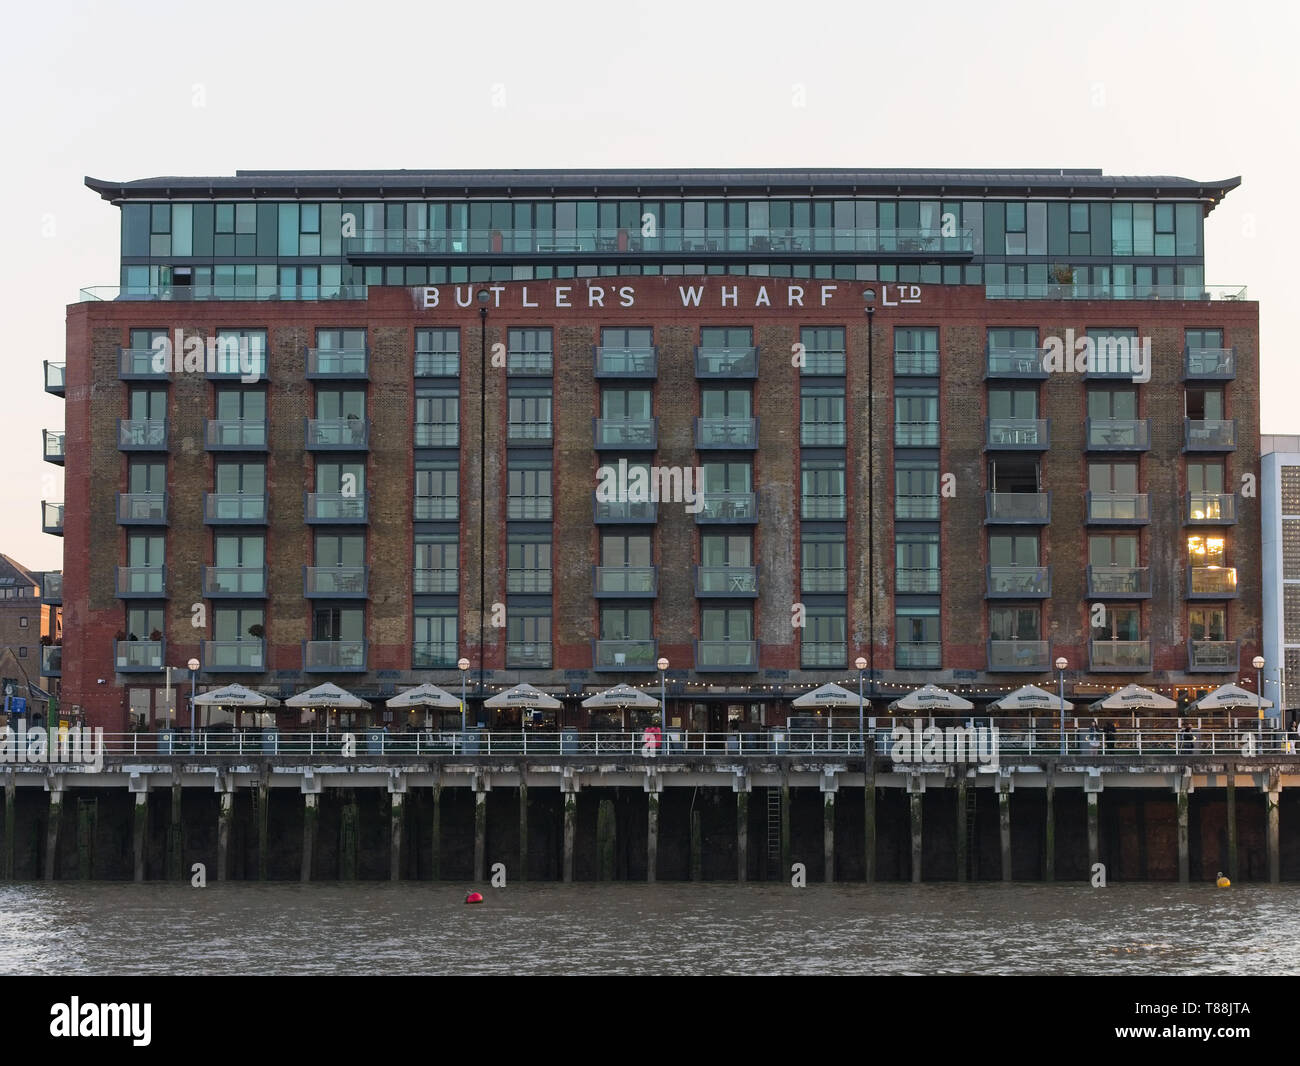 Historic Butler's Wharf building on the south bank of the River Thames at dusk, London, UK. Stock Photo